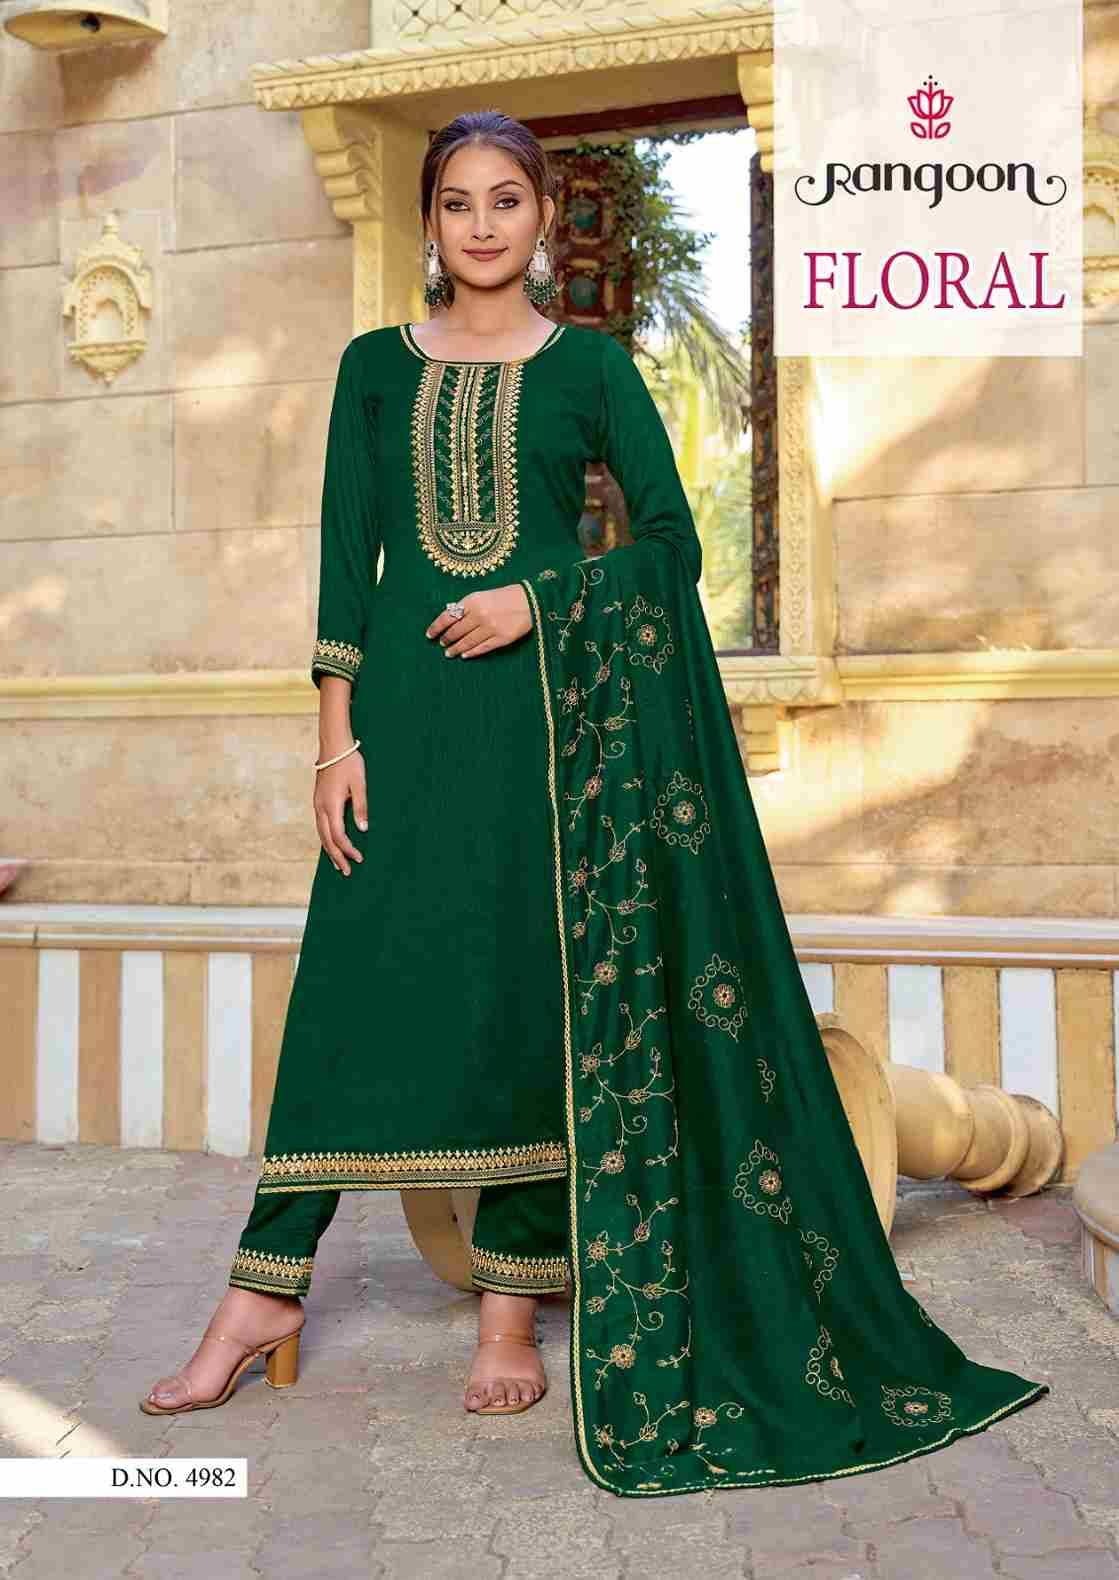 Floral By Rangoon 4981 To 4986 Series Beautiful Stylish Festive Suits Fancy Colorful Casual Wear & Ethnic Wear & Ready To Wear Silk Dresses At Wholesale Price